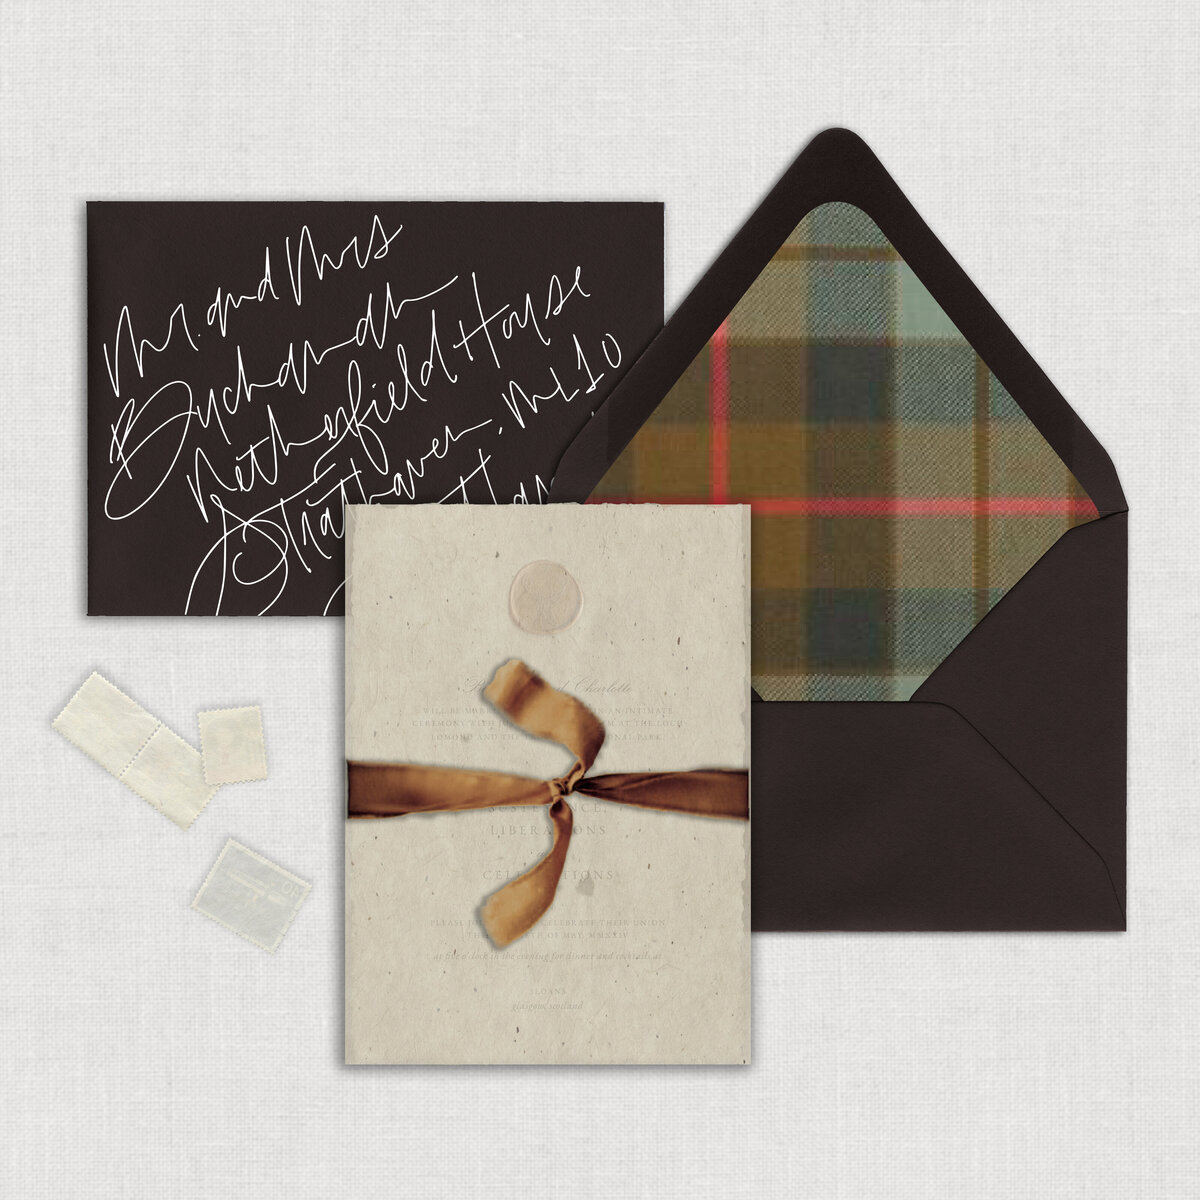 Letterpress Scotland Destination Wedding invitation suite with copper wax seal on textured thick handmade paper with chocolate brown mailing envelope with plaid tartan envelope liner wrapped with a textured paper wrap and tied with copper velvet ribbon.